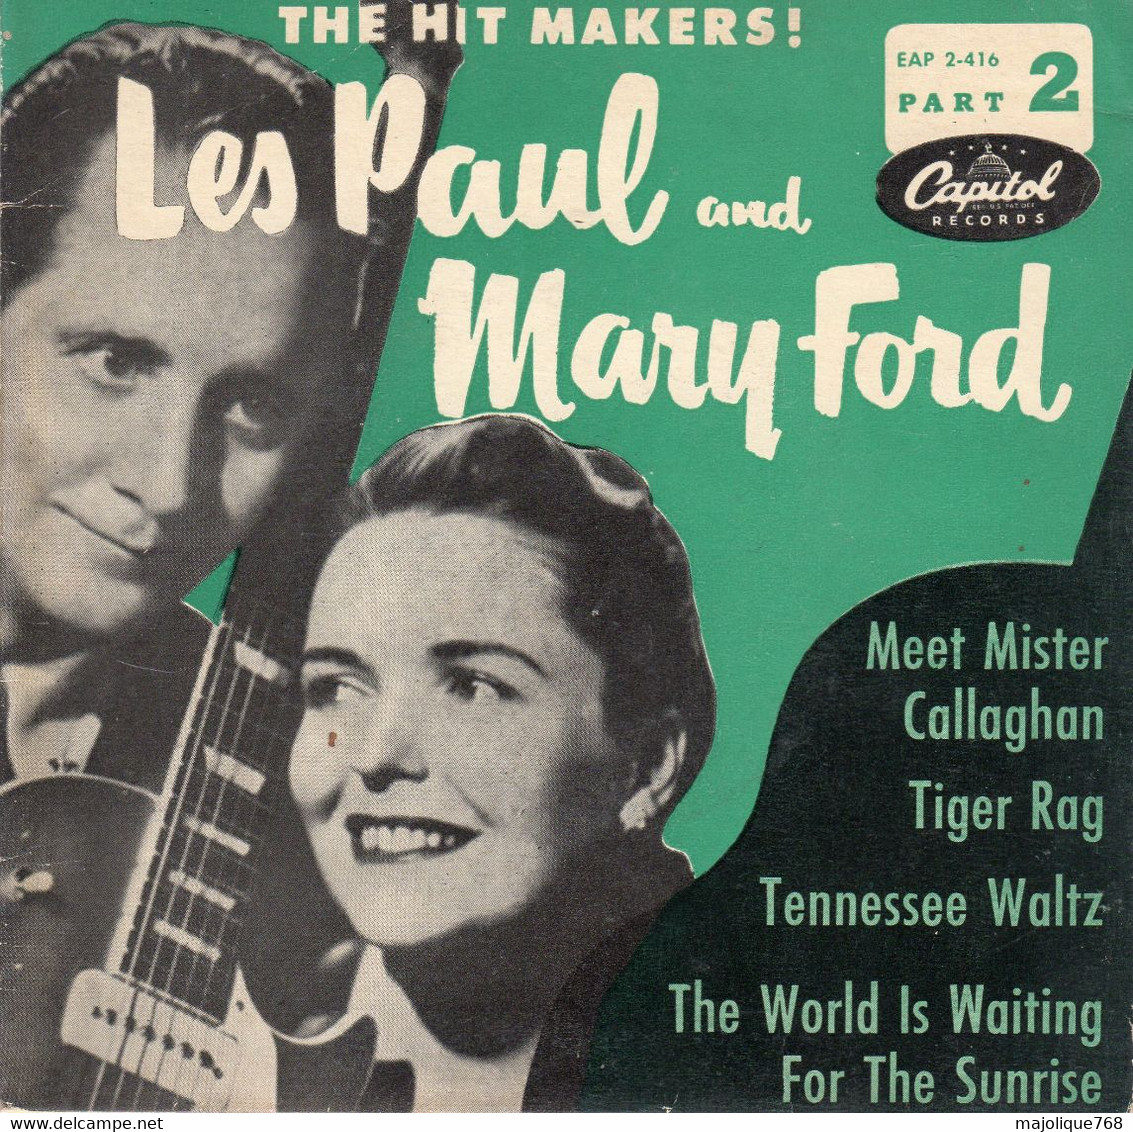 Disque - Les Paul And Mary Ford - The Hit Makers! Part II - Capitol EAP 2-416 - U S 1953 - Country Et Folk